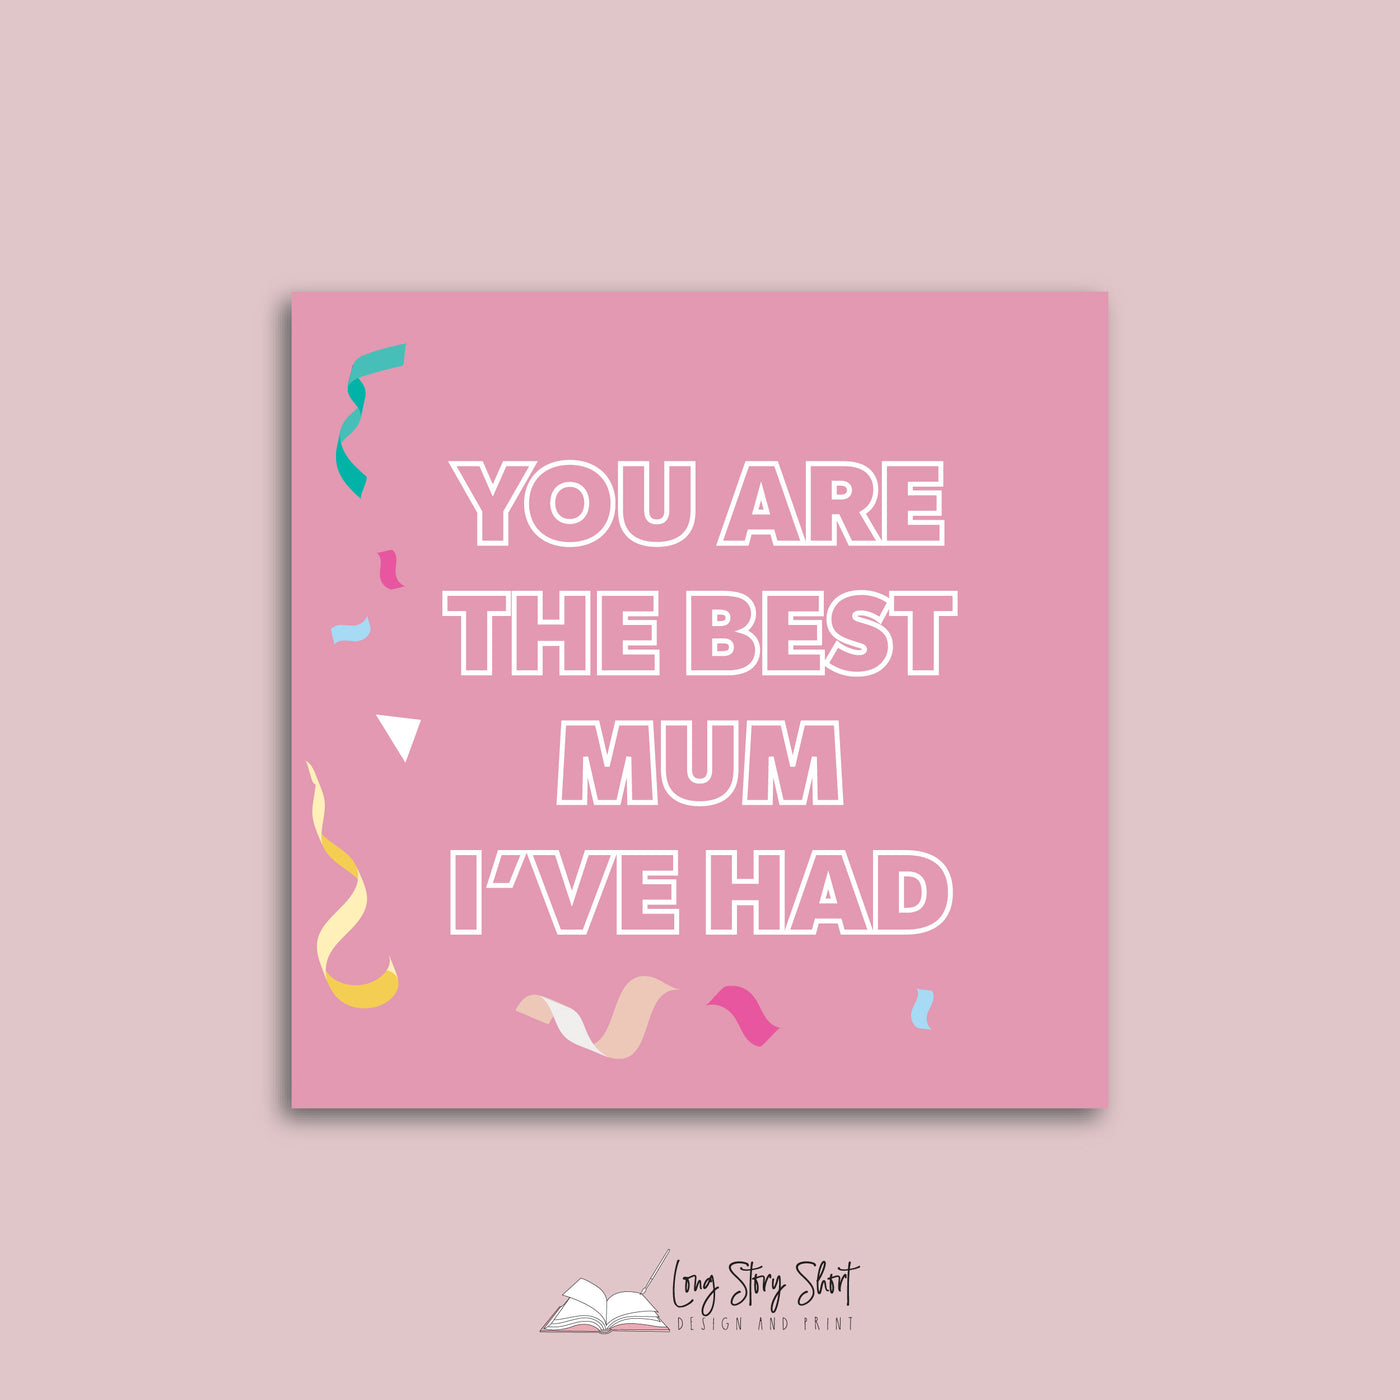 You are the best mum i've had Square Vinyl Label Pack